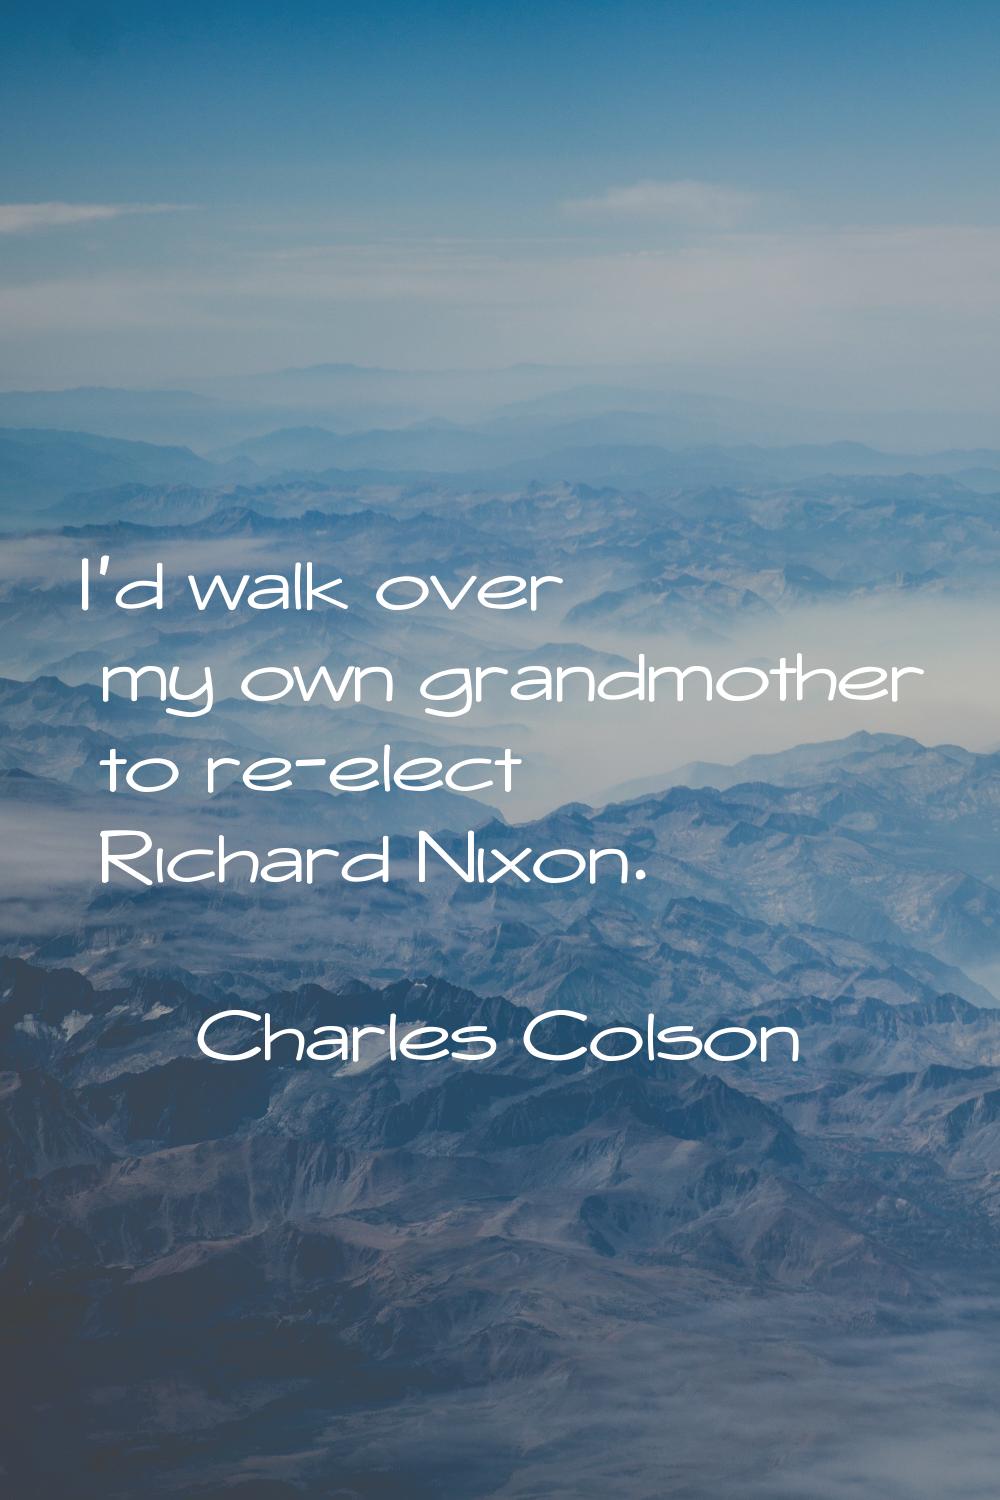 I'd walk over my own grandmother to re-elect Richard Nixon.